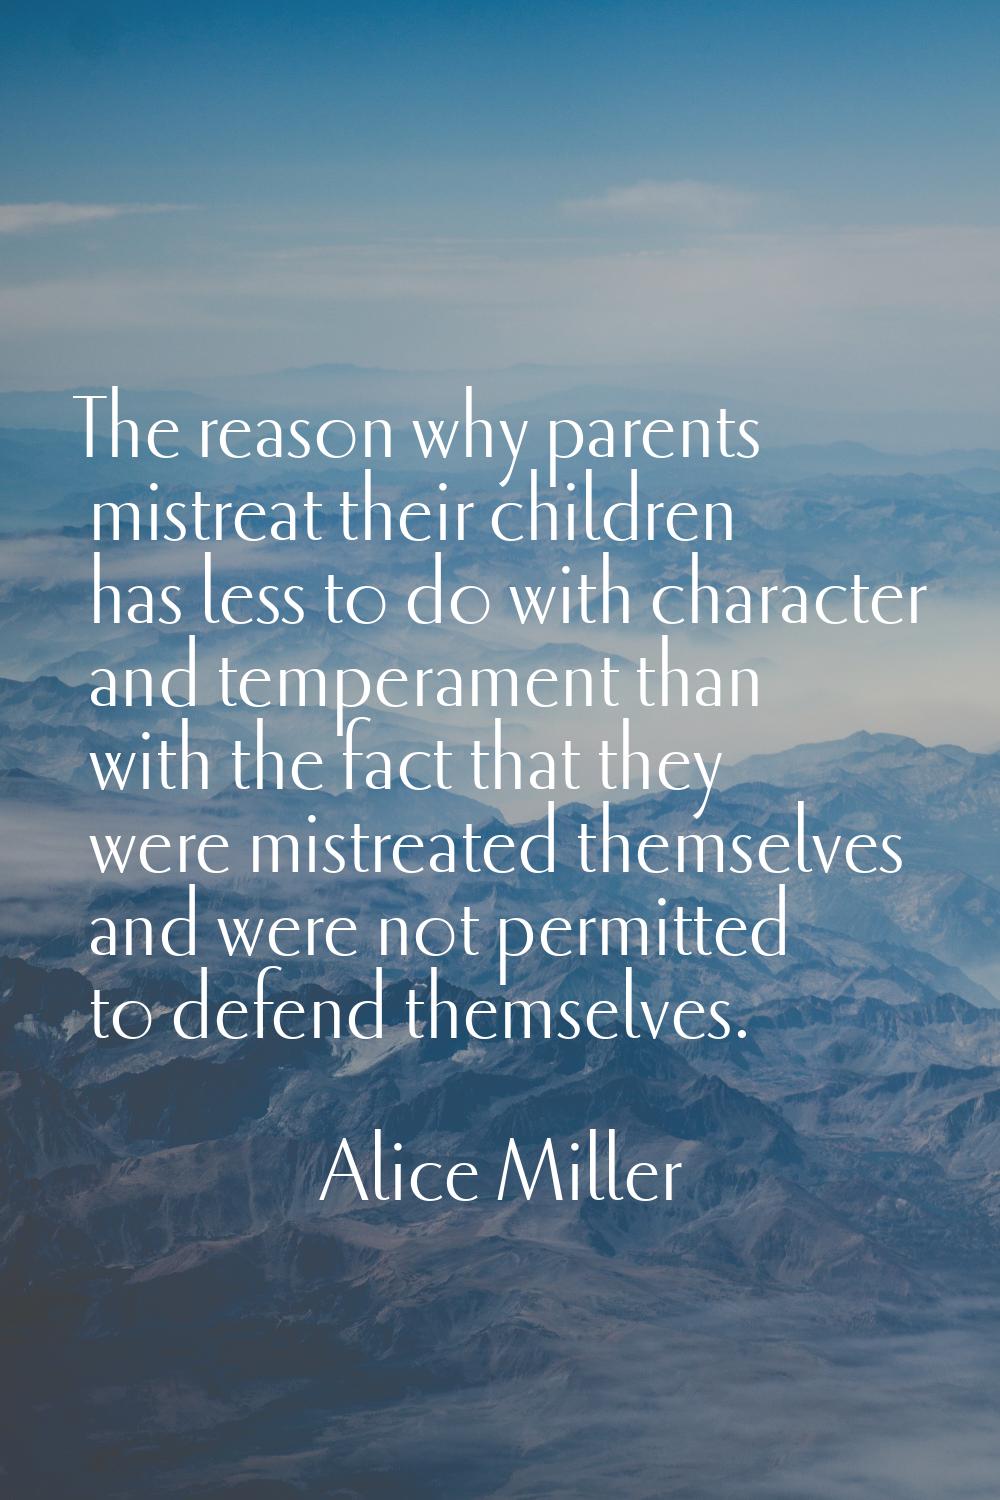 The reason why parents mistreat their children has less to do with character and temperament than w